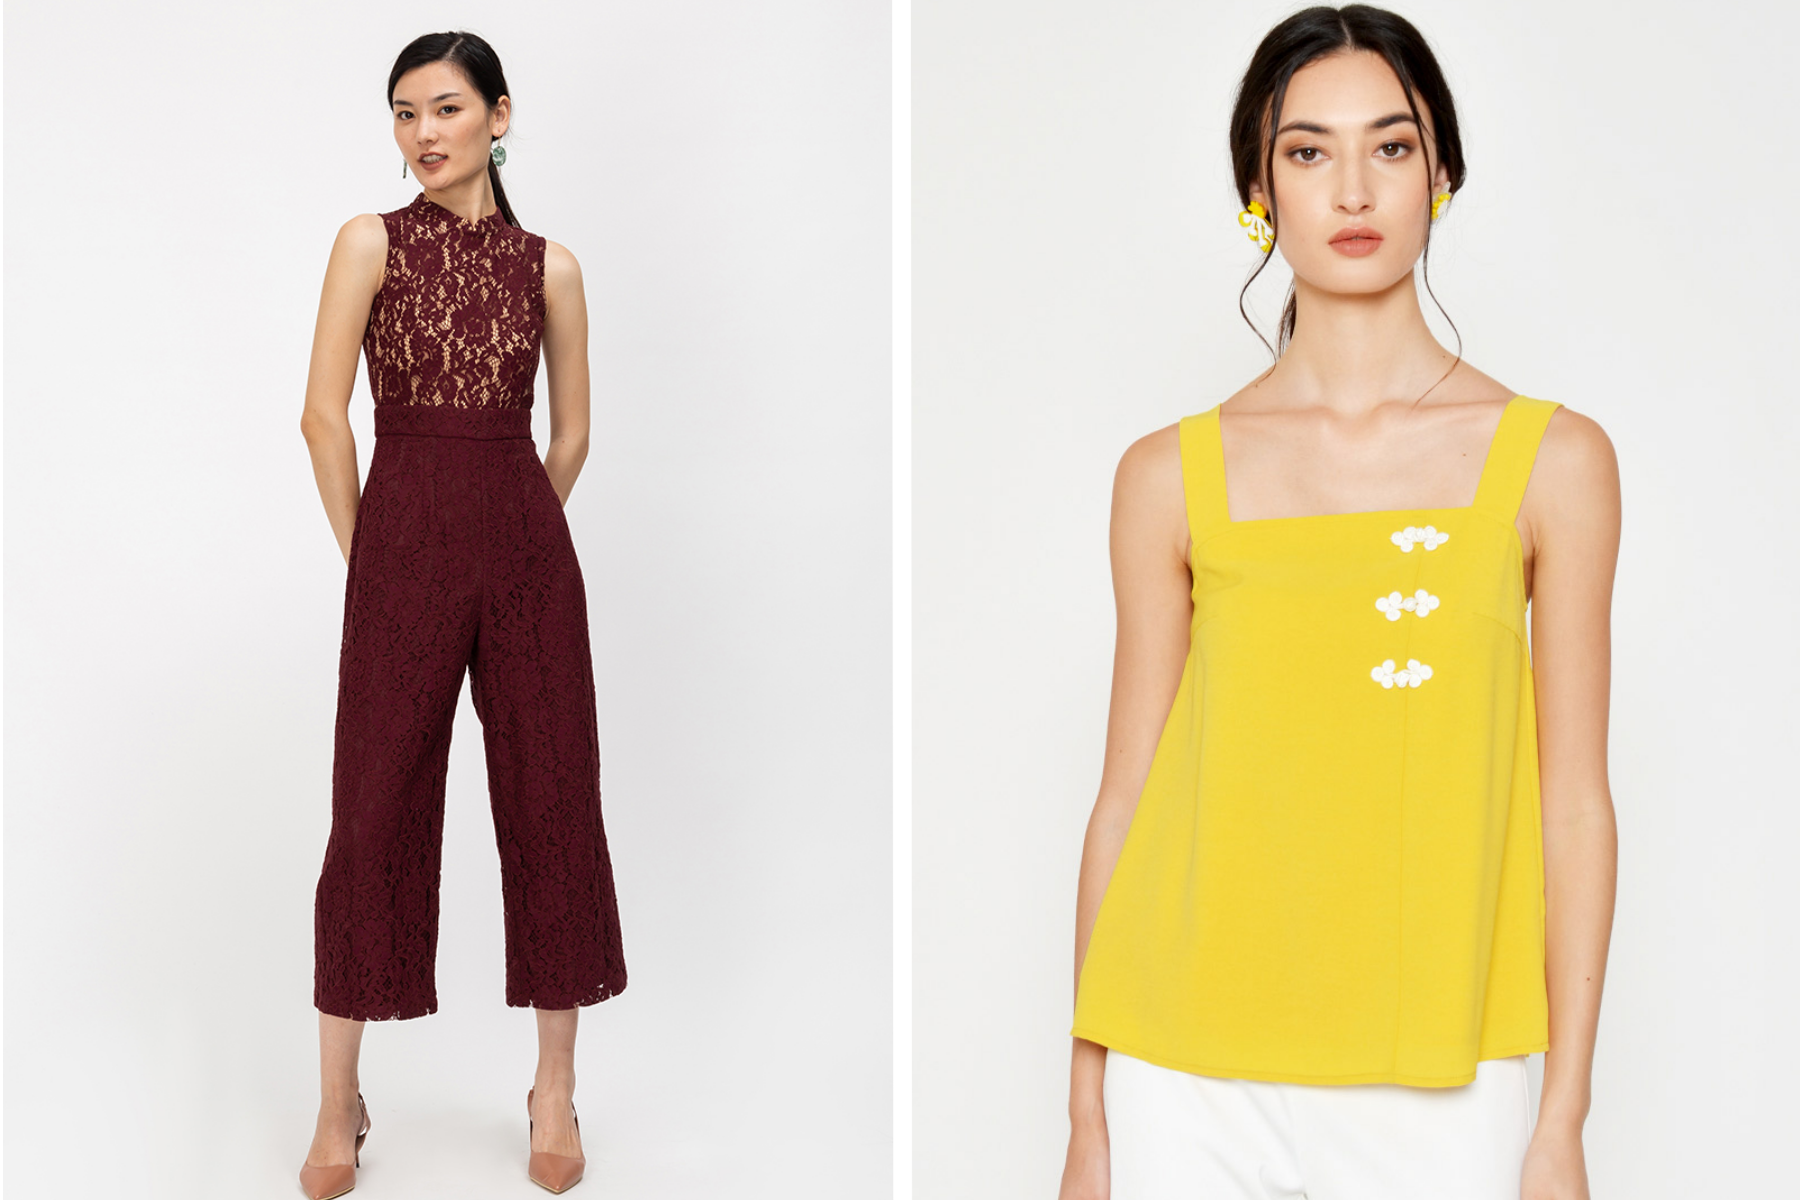 Sharlene Lace Cheongsam Jumpsuit and Lilyth Chinese Button Top